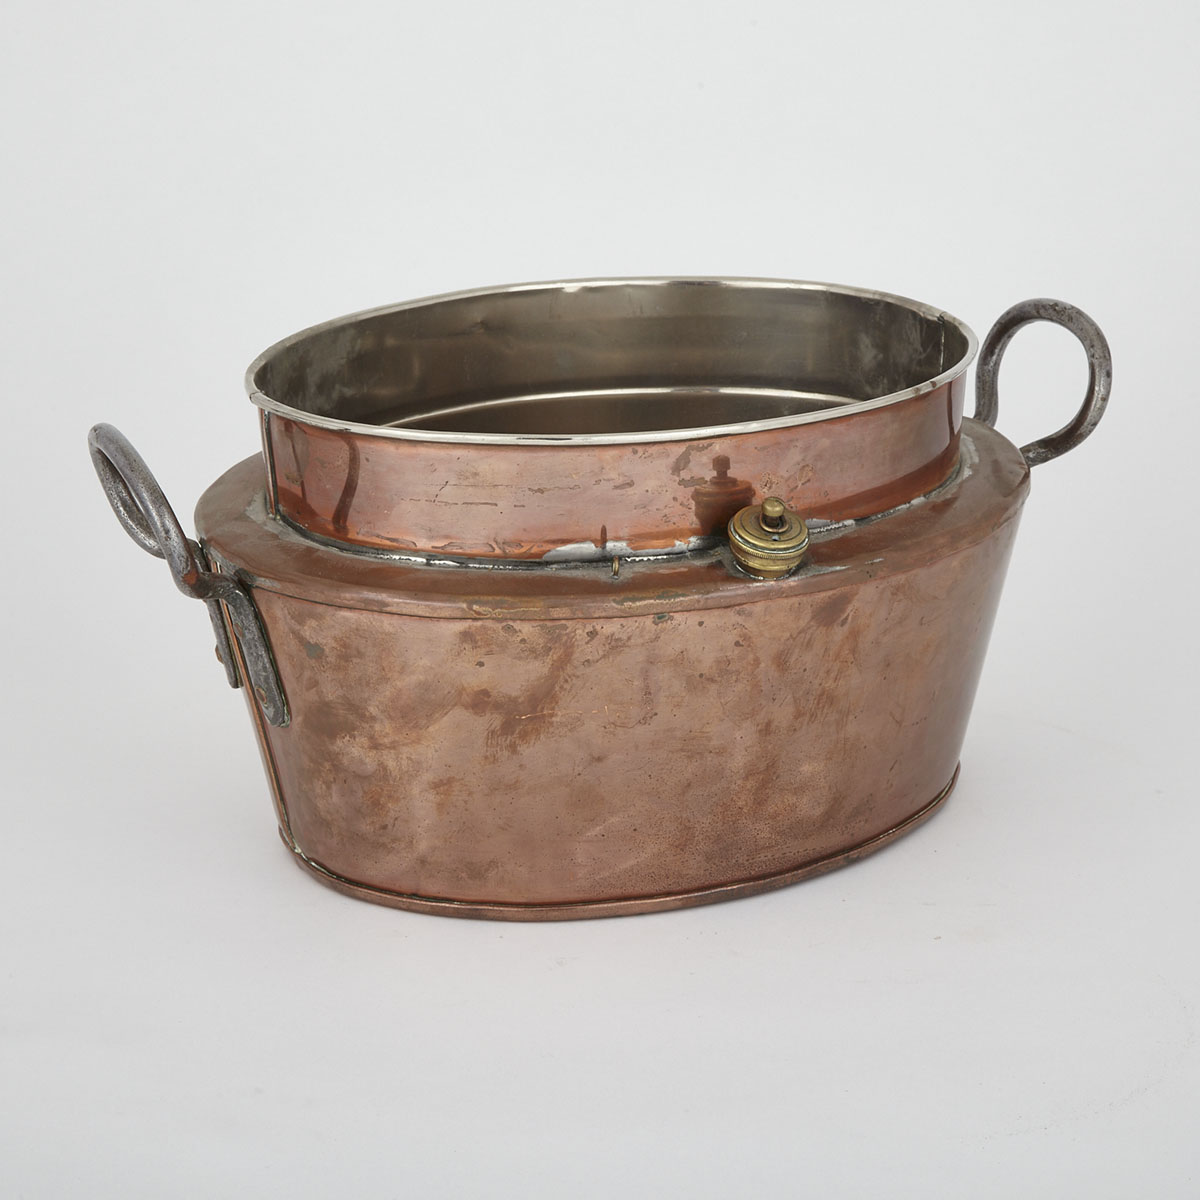 Lined Copper Oval Double Boiler, early 20th century